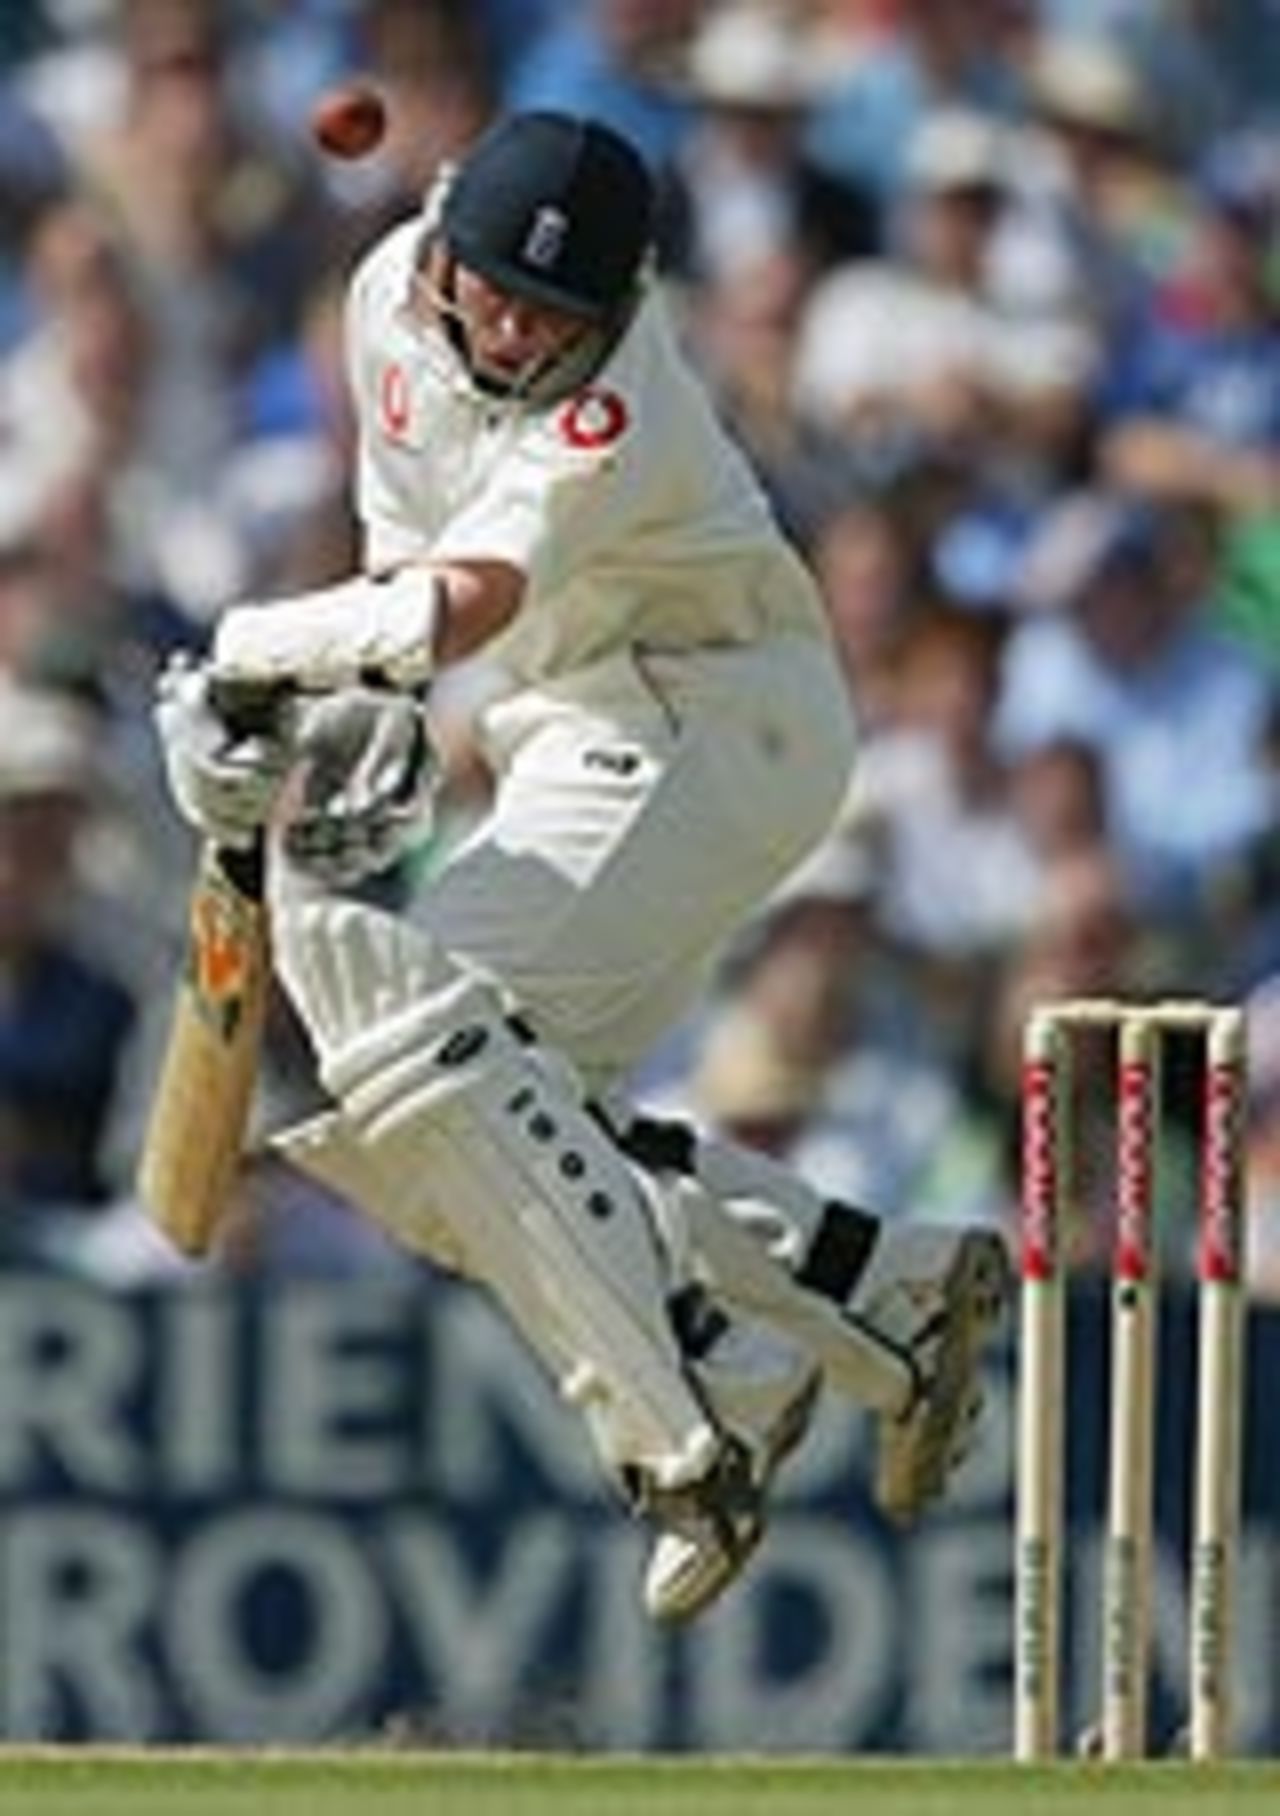 Ian Bell takes a painful blow to the shoulder, as he makes his debut in the fourth Test at The Oval, England v West Indies, 4th Test, August 19, 2004